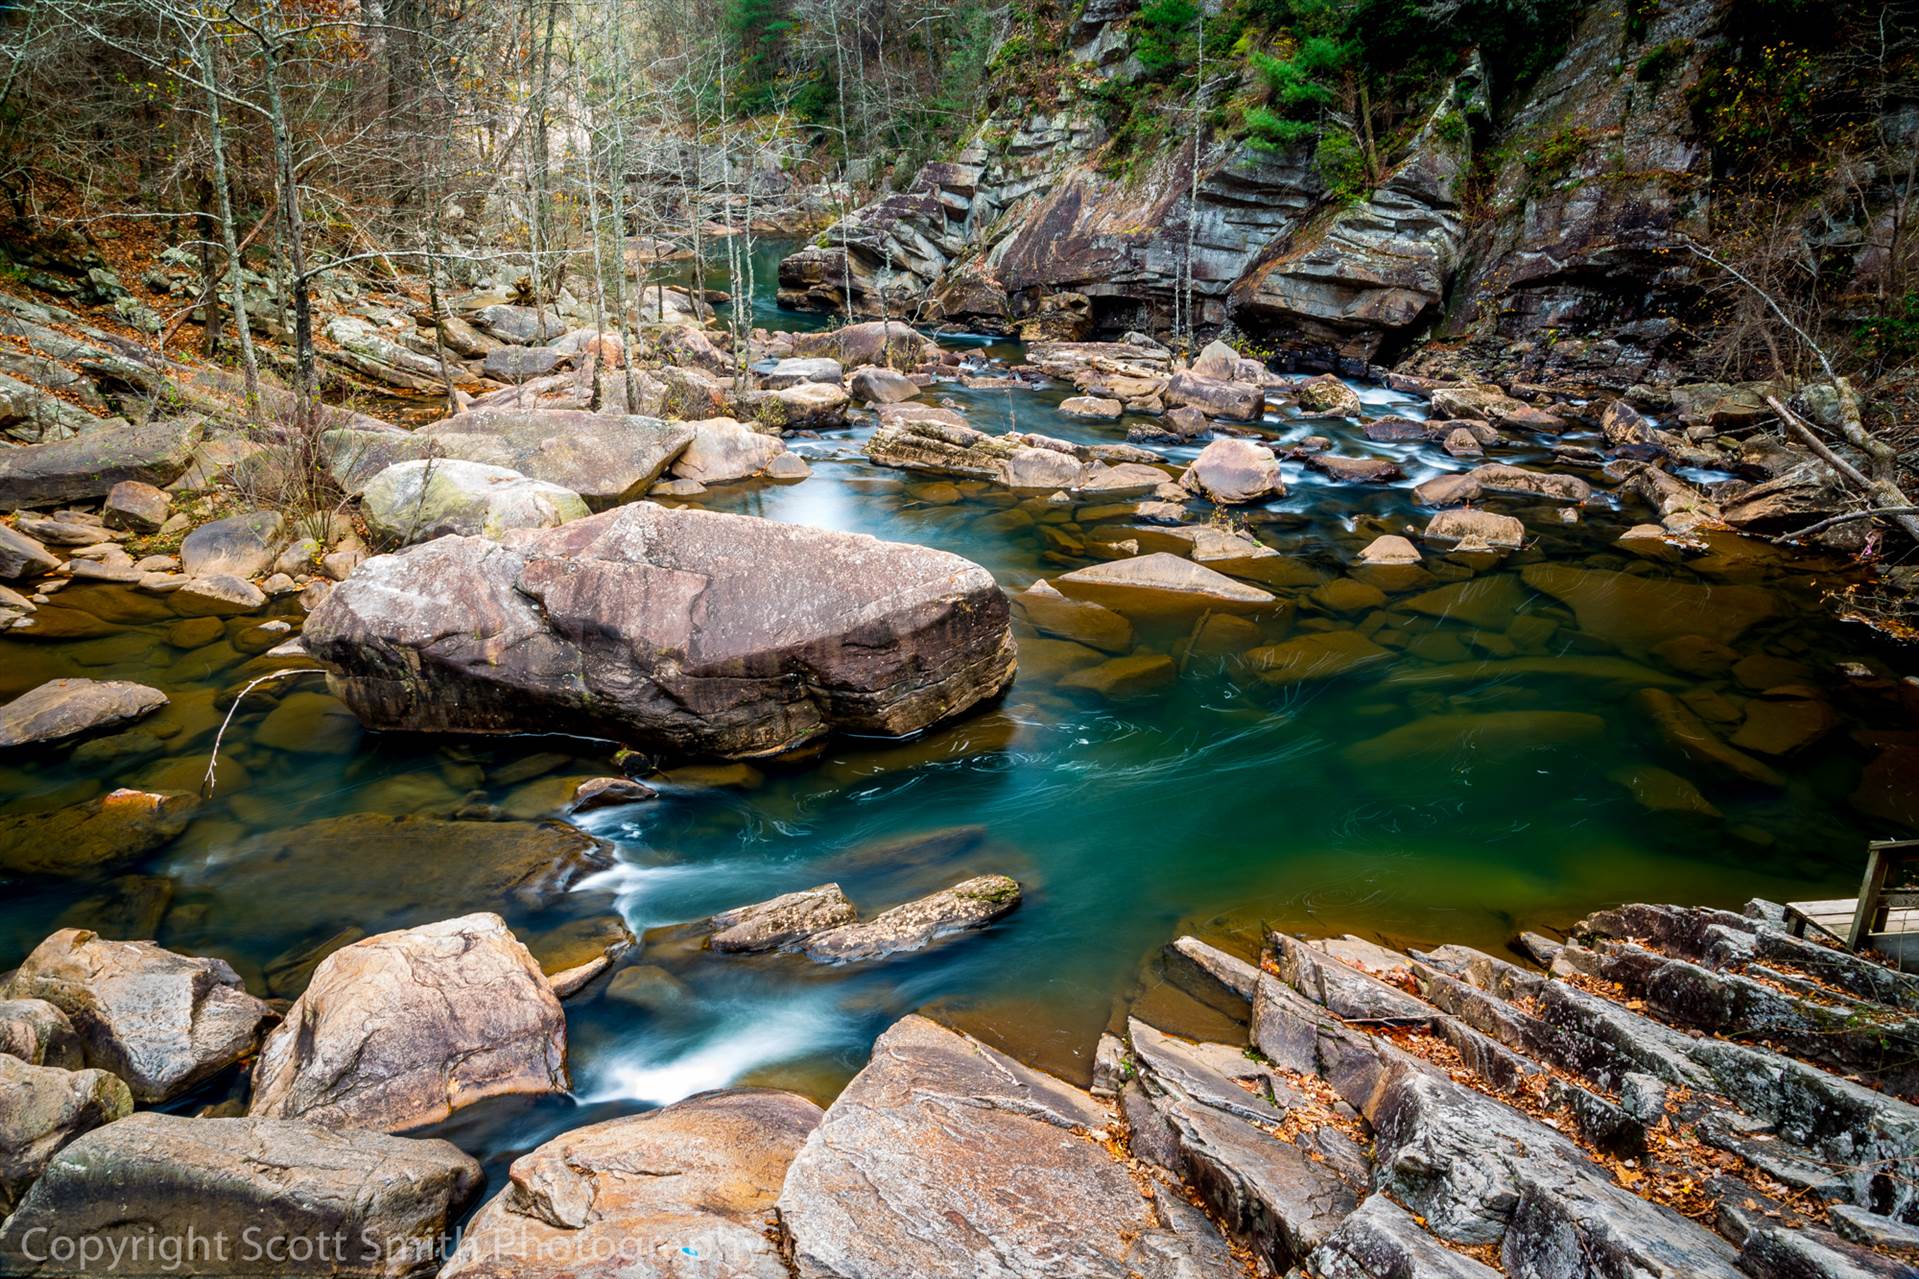 Tallulah Gorge The beautiful emerald-green water at the bottom of Tallulah Gorge, Georgia. by Scott Smith Photos